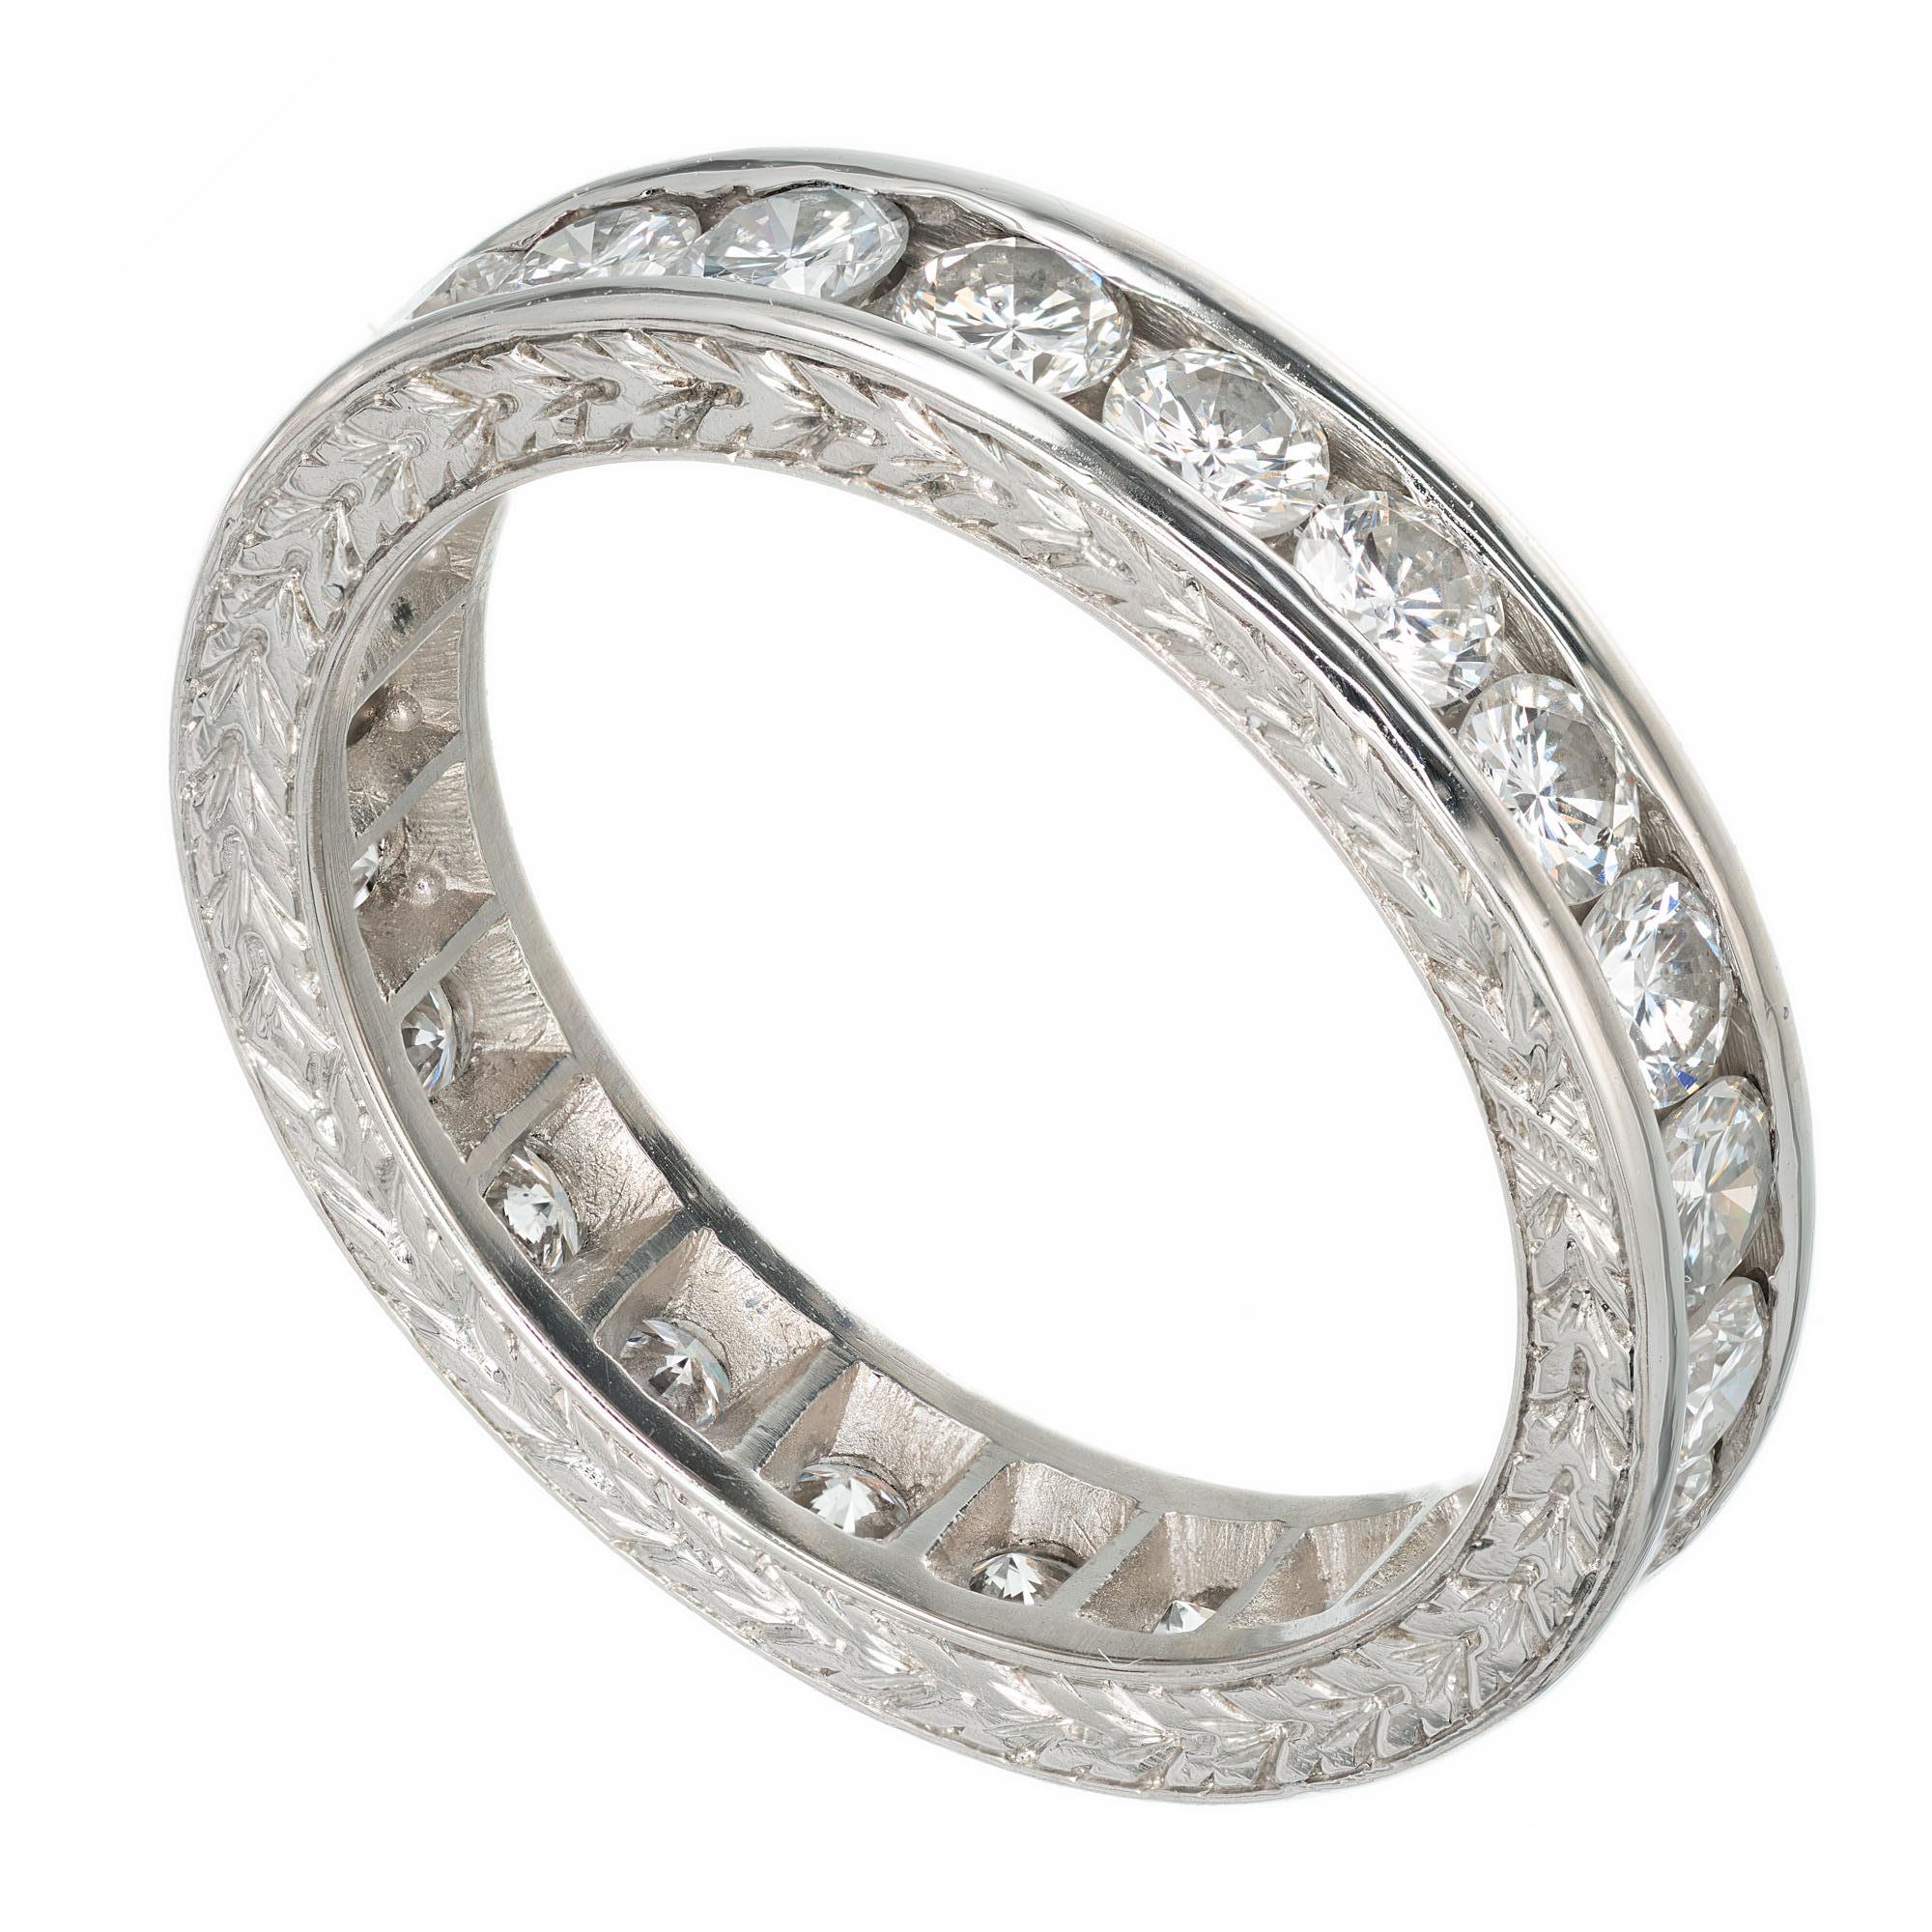 Peter Suchy 1.55 Carat Diamond Platinum Eternity Wedding Band Ring In Excellent Condition For Sale In Stamford, CT